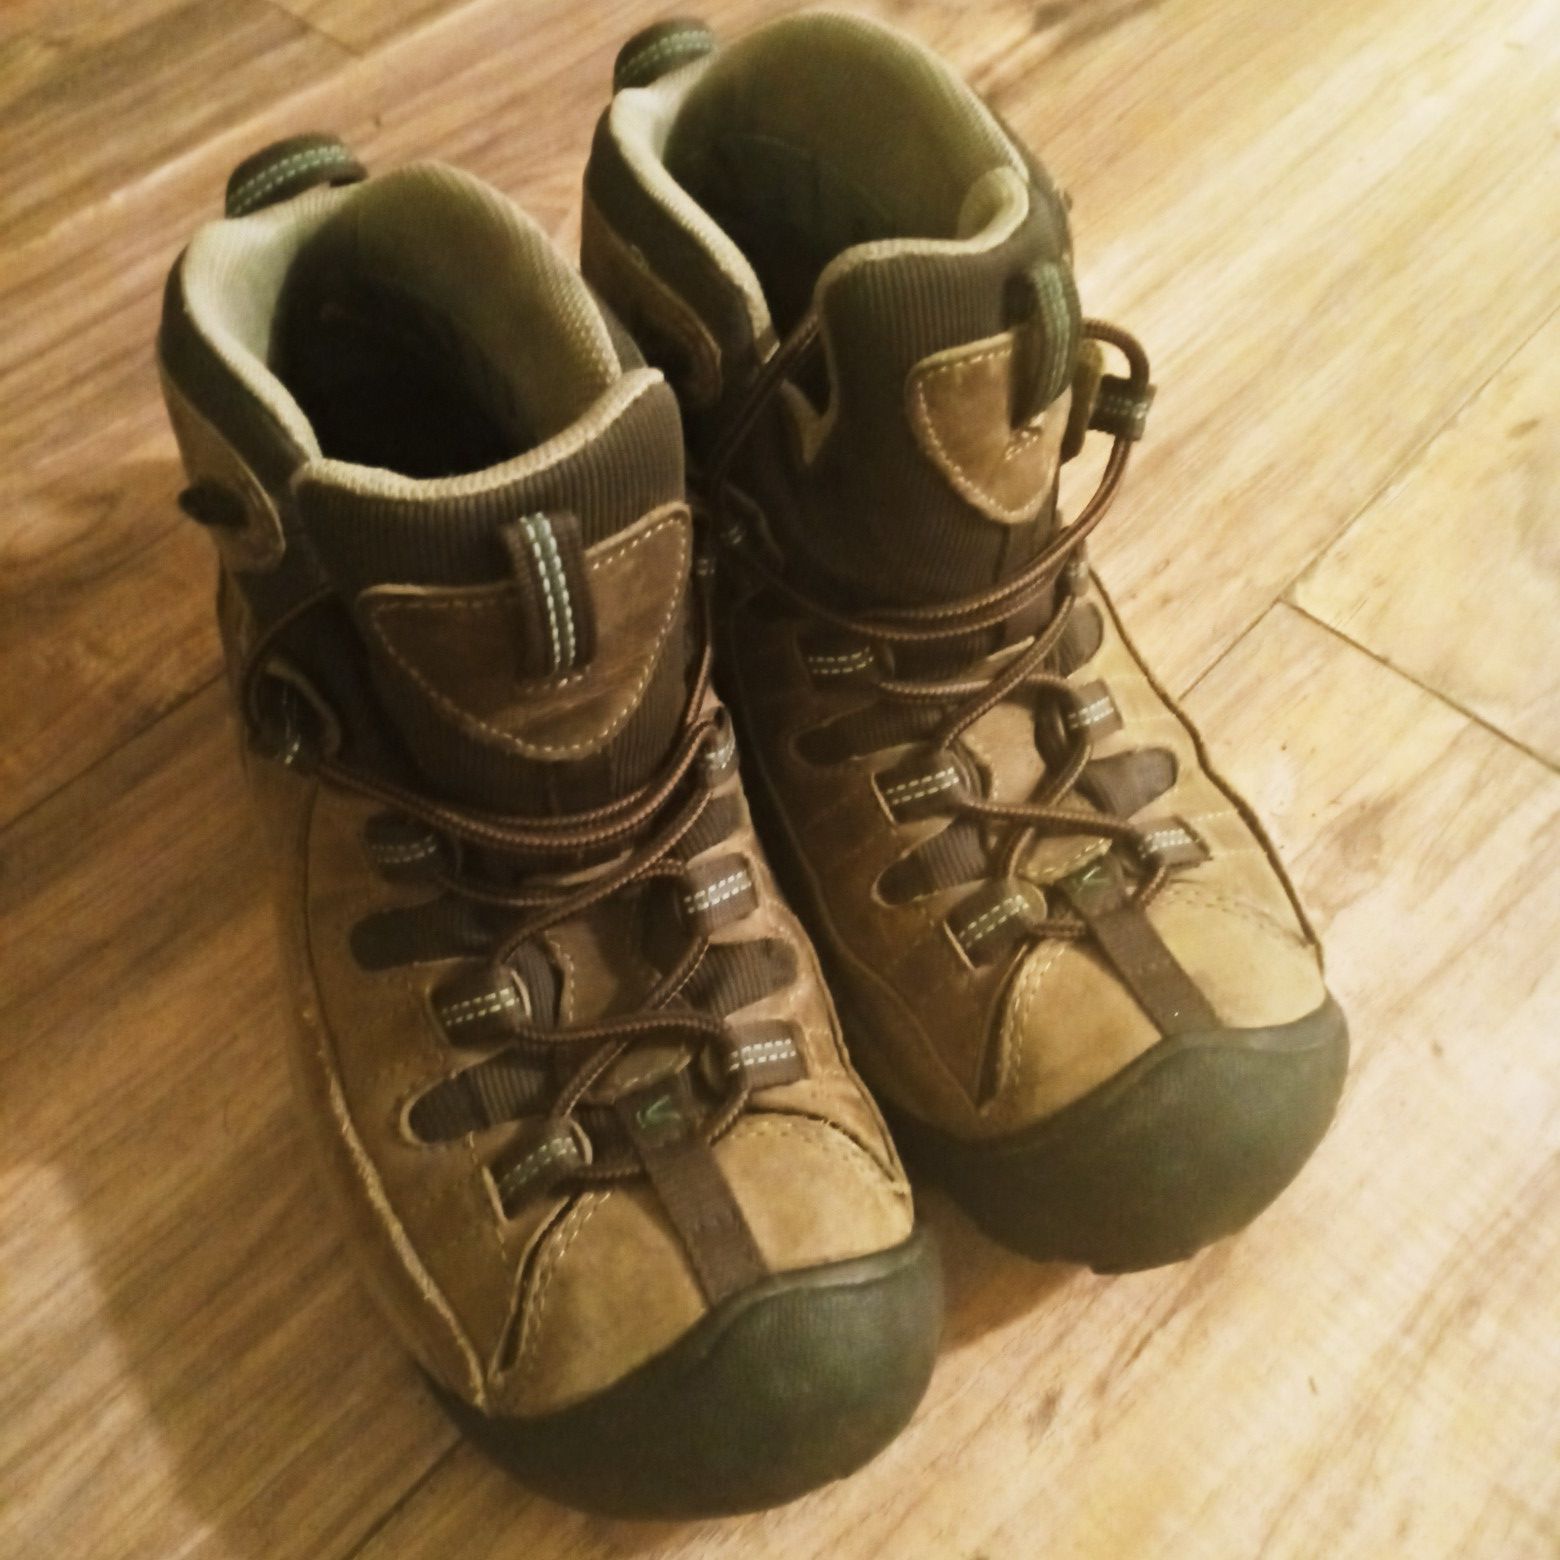 Keen size 11 hiking boots